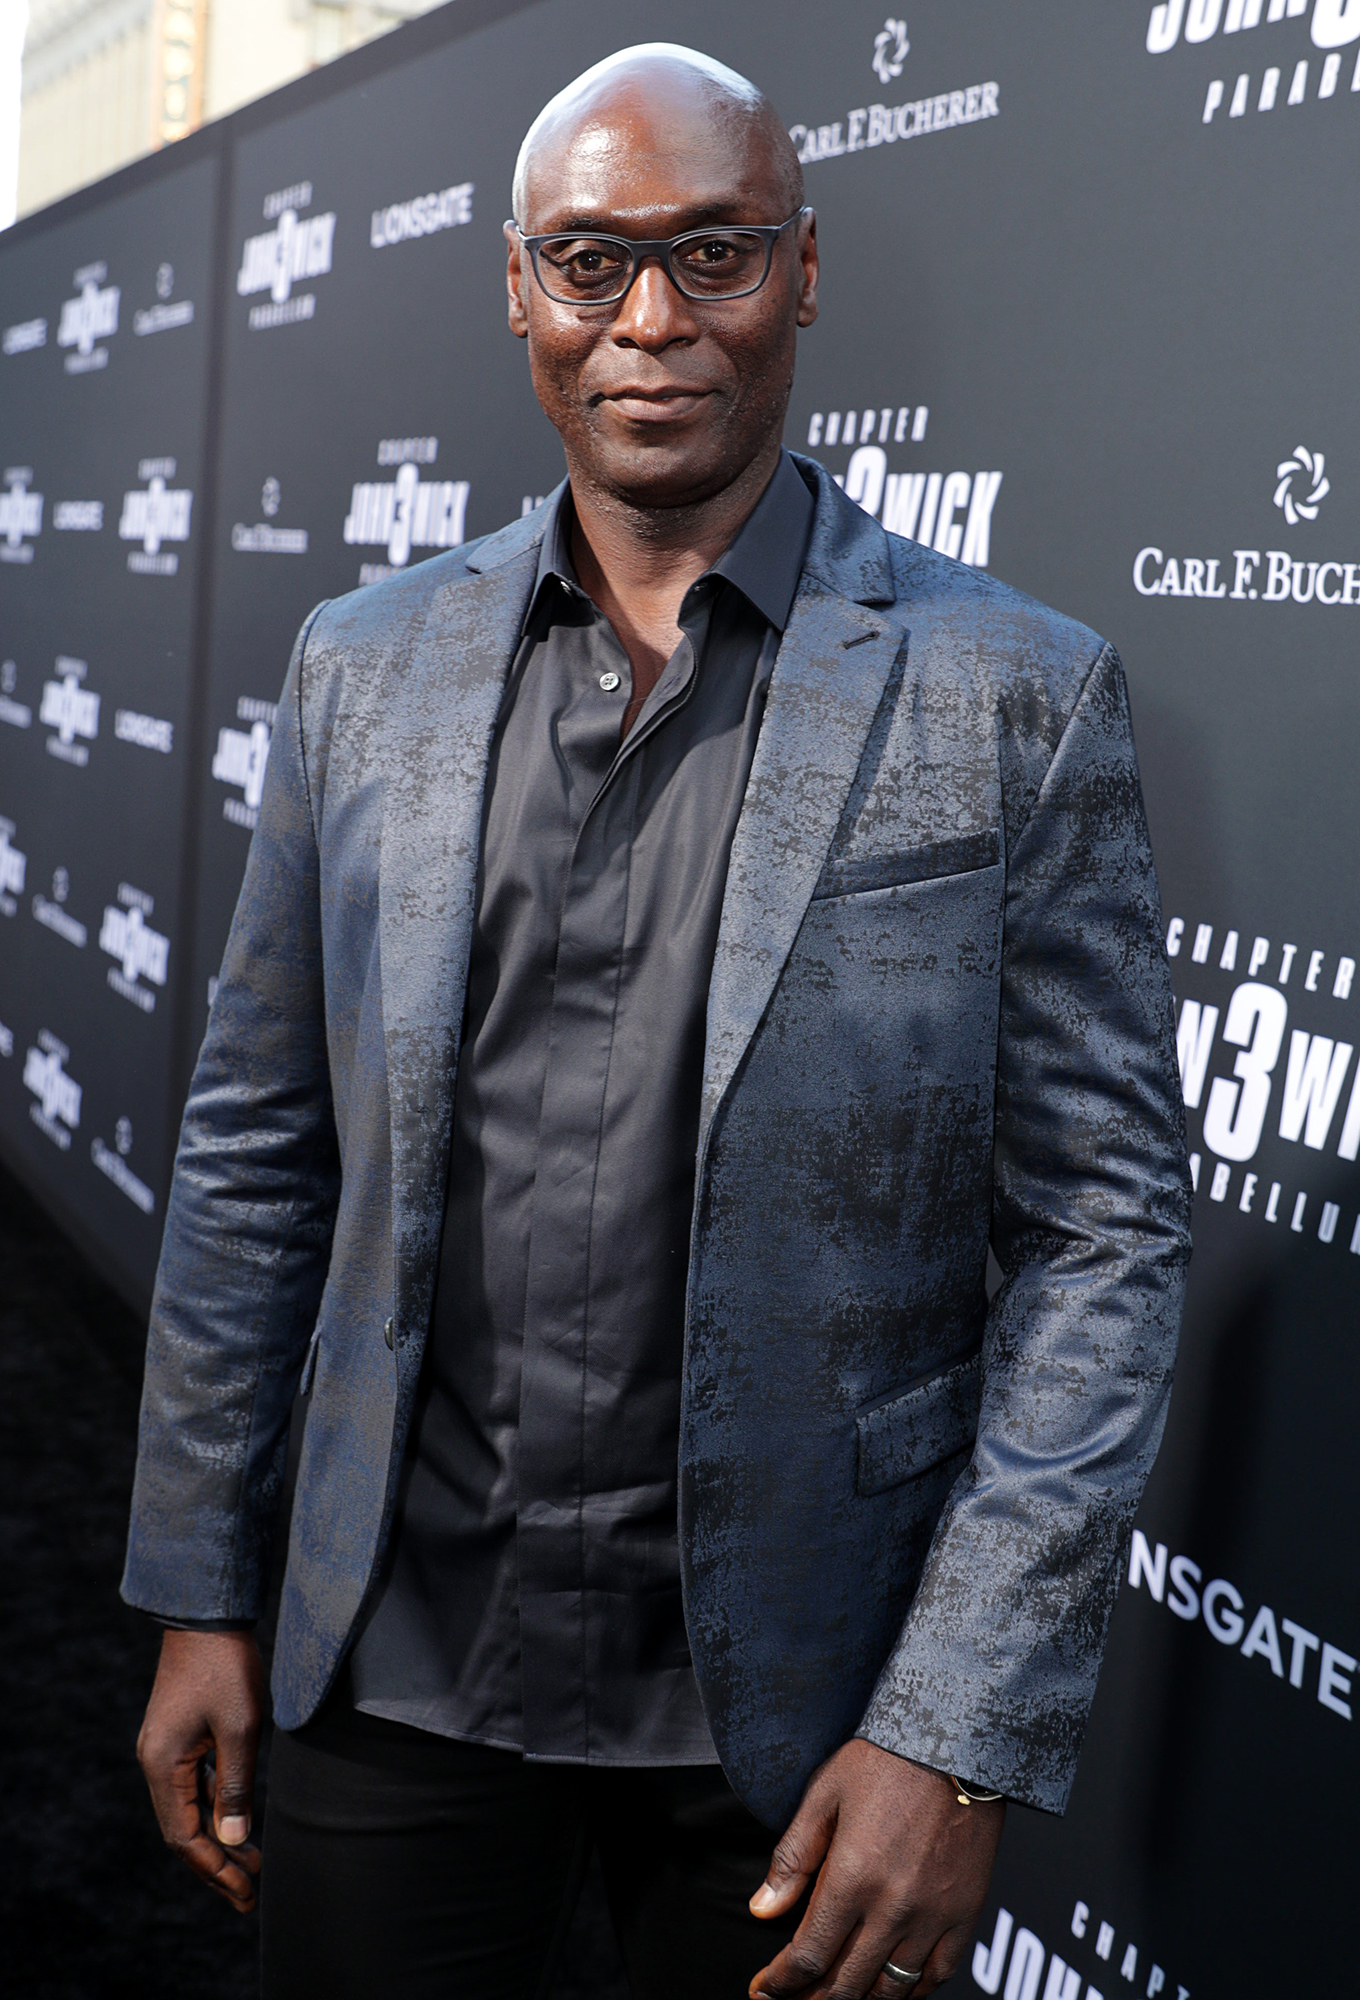 John Wick, The Wire and Fringe actor Lance Reddick's cause of